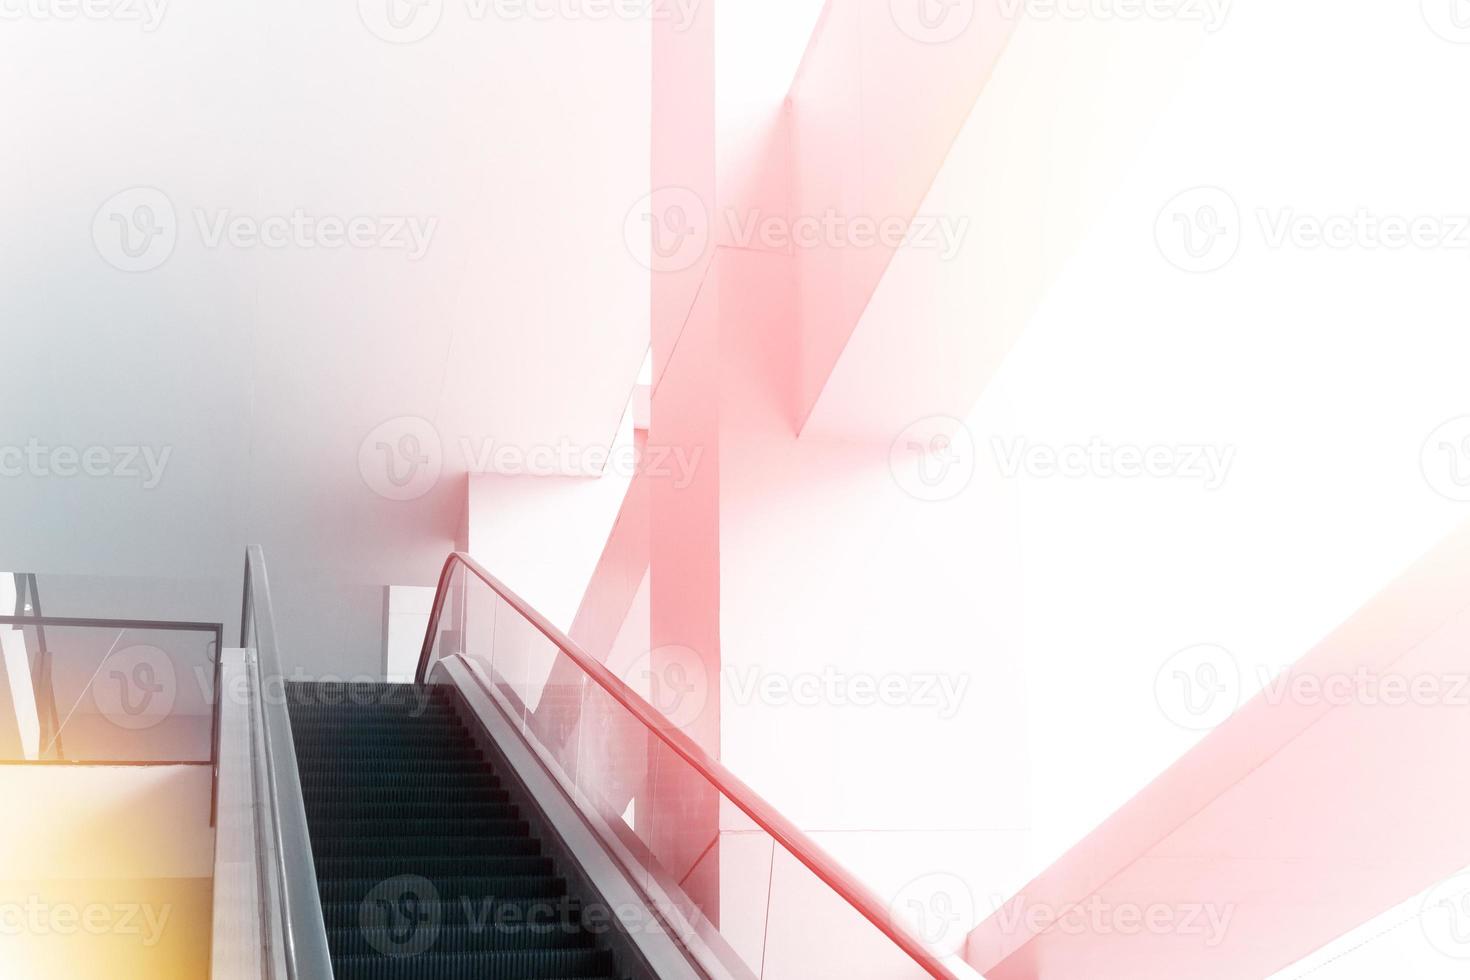 Modern office building and moving escalator stairs, interior design photo